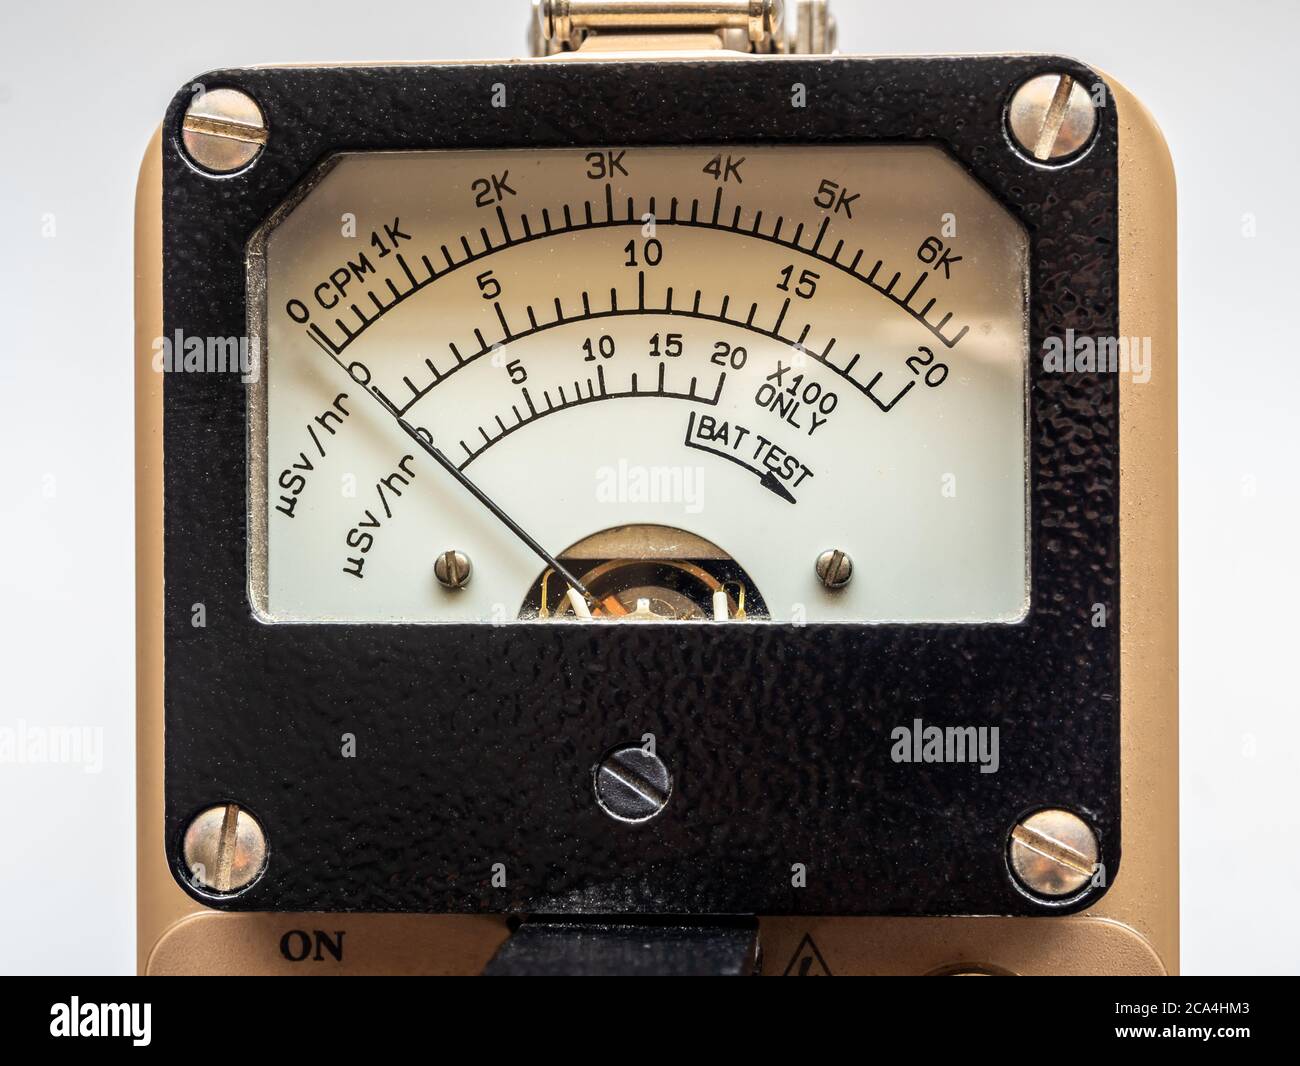 handboeien Opgewonden zijn Janice Count per minute scale for radiation contamination and microSIevert per  hour scale for radiation dose rate on Dial display of Radiation survey meter  Stock Photo - Alamy